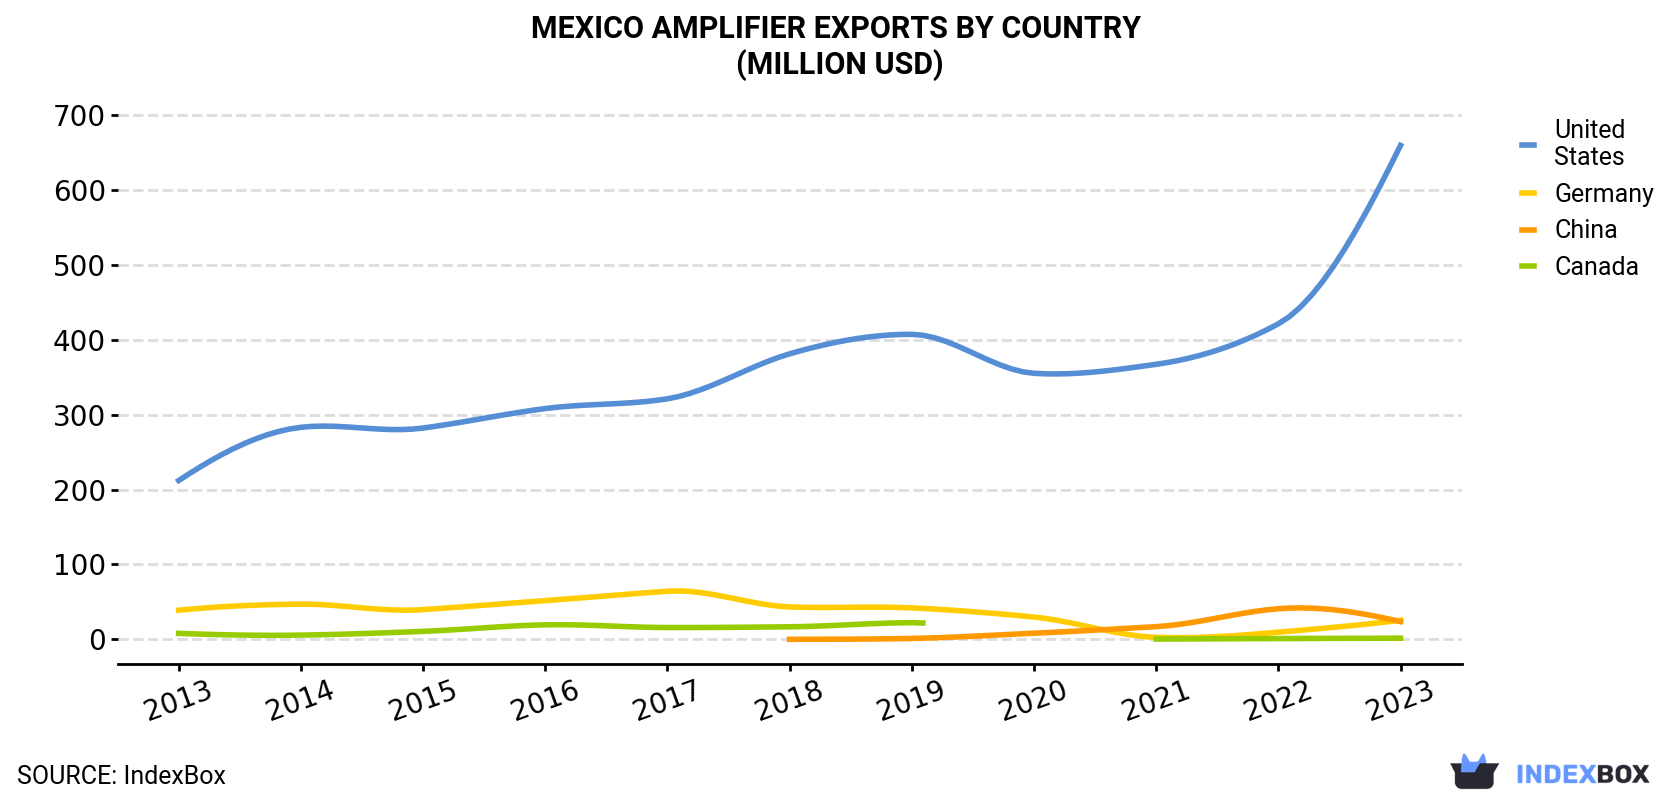 Mexico Amplifier Exports By Country (Million USD)